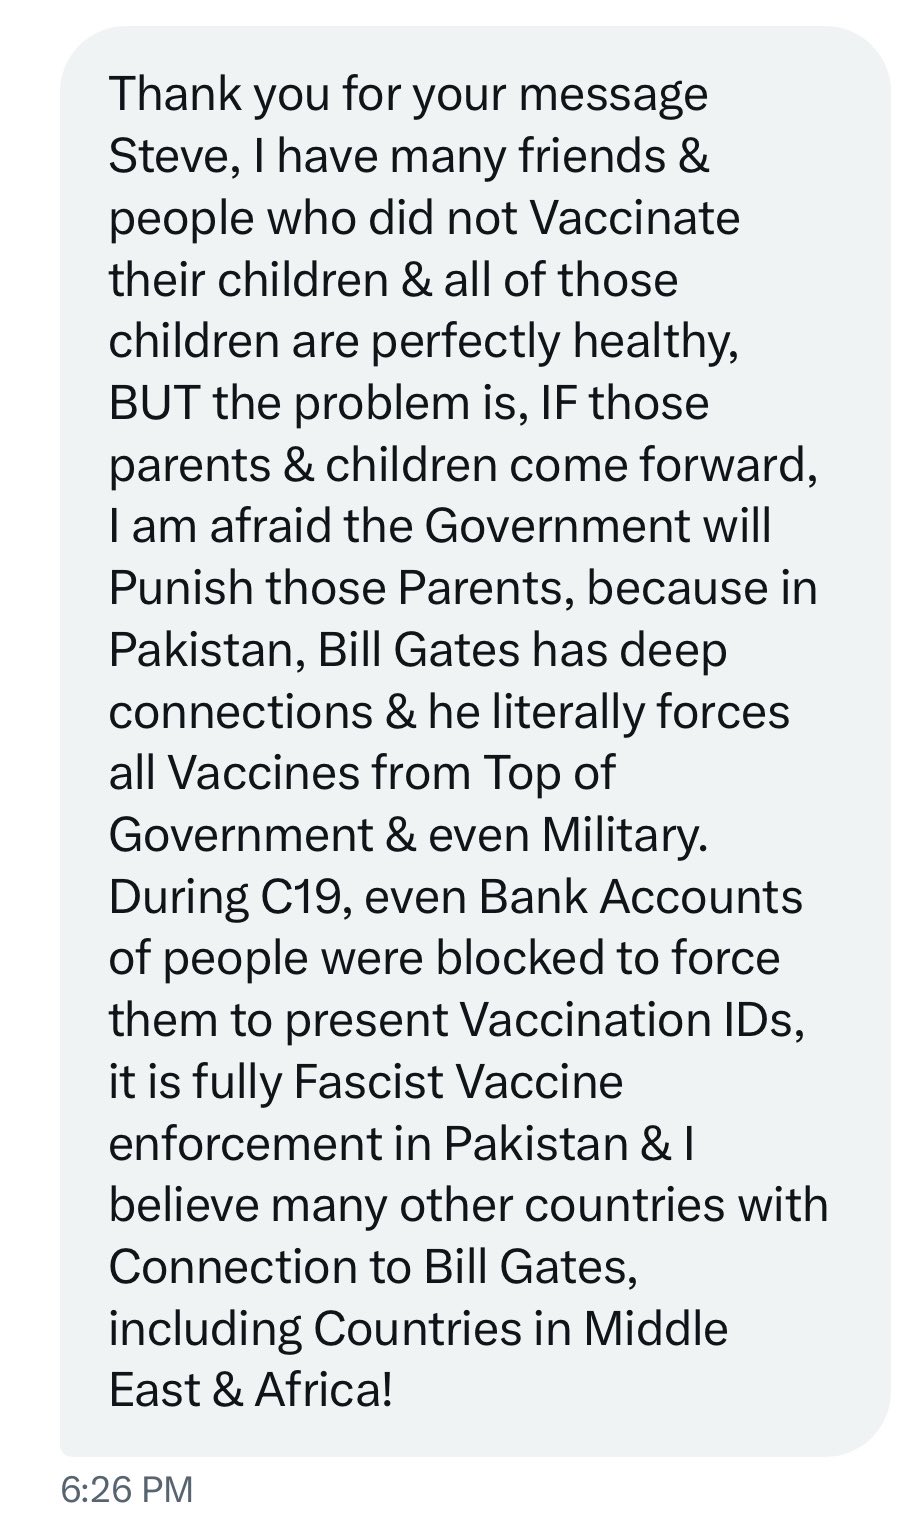 Instant message saying that people are being hunted down for refusing the vaccine in Pakistan